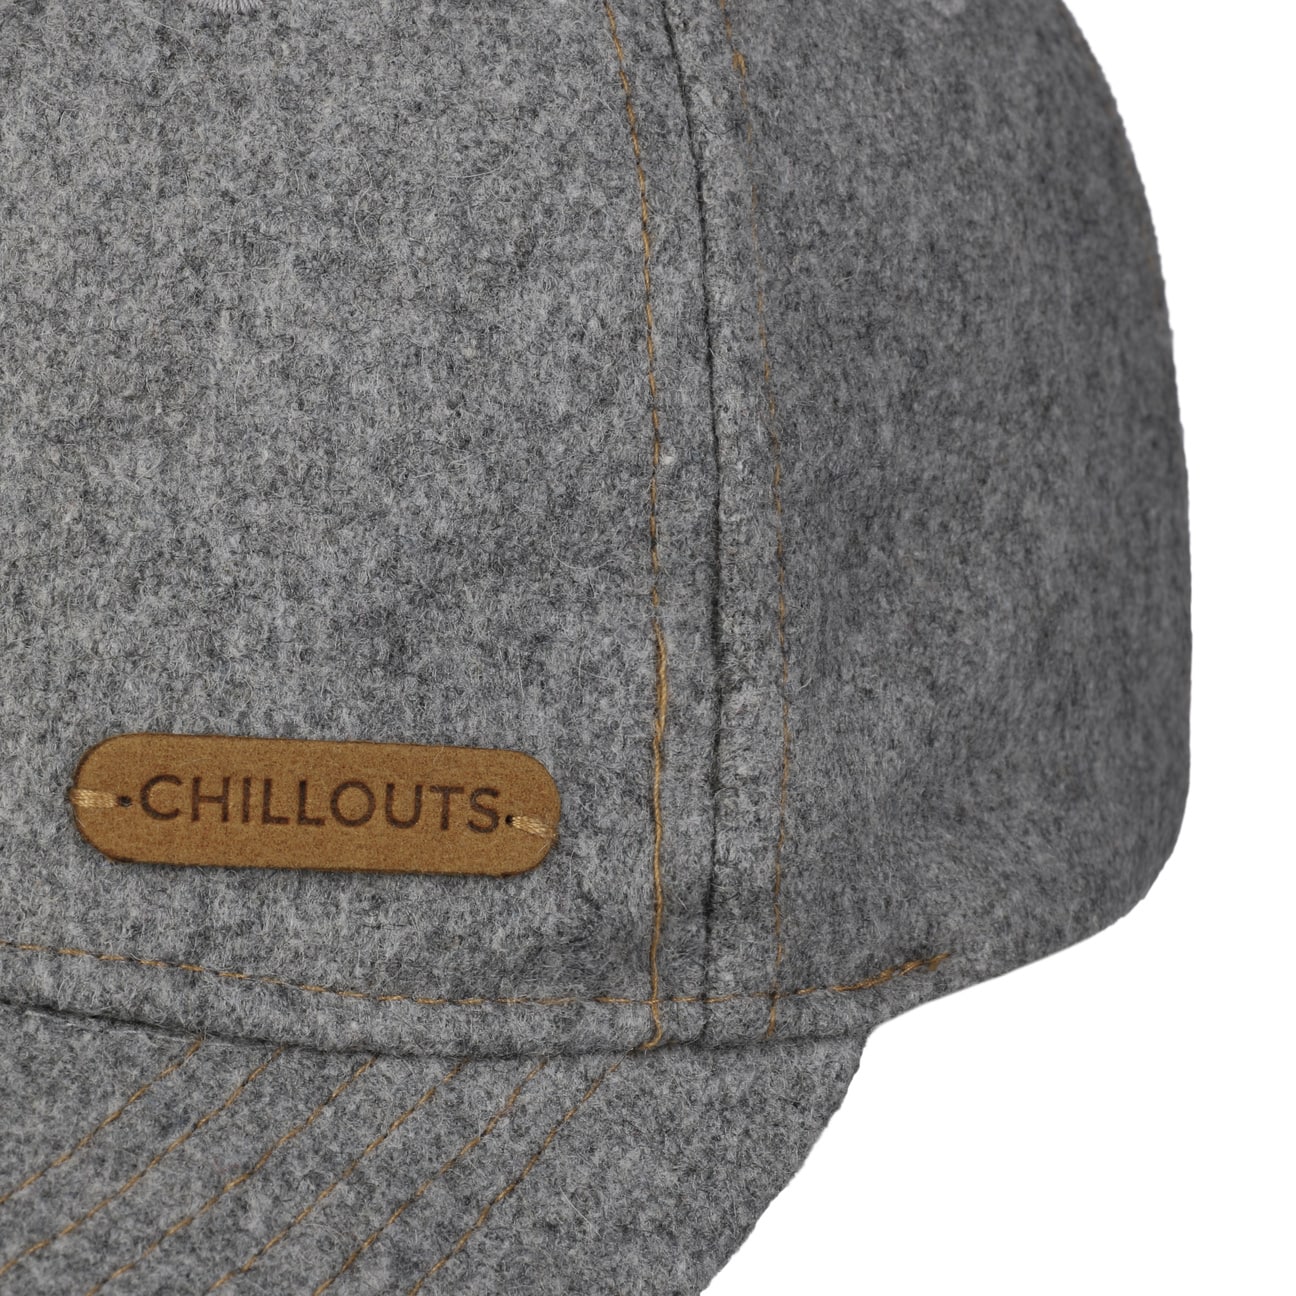 Matero Cap by Chillouts - 33,95 CHF